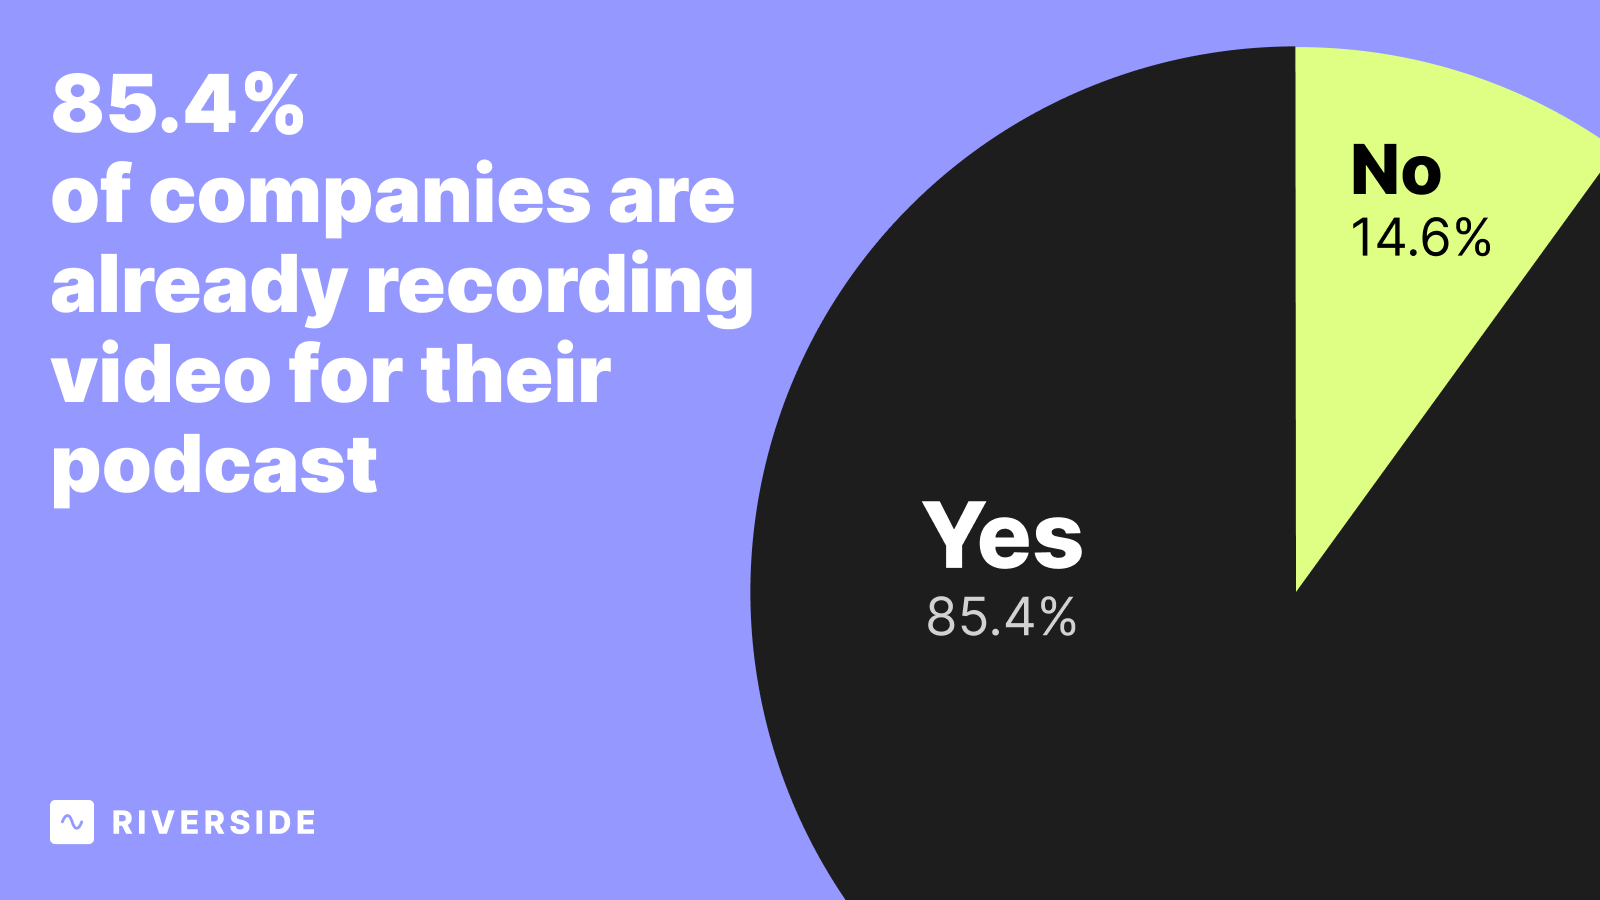 Pie chart showing how many companies are already using video for their podcastss